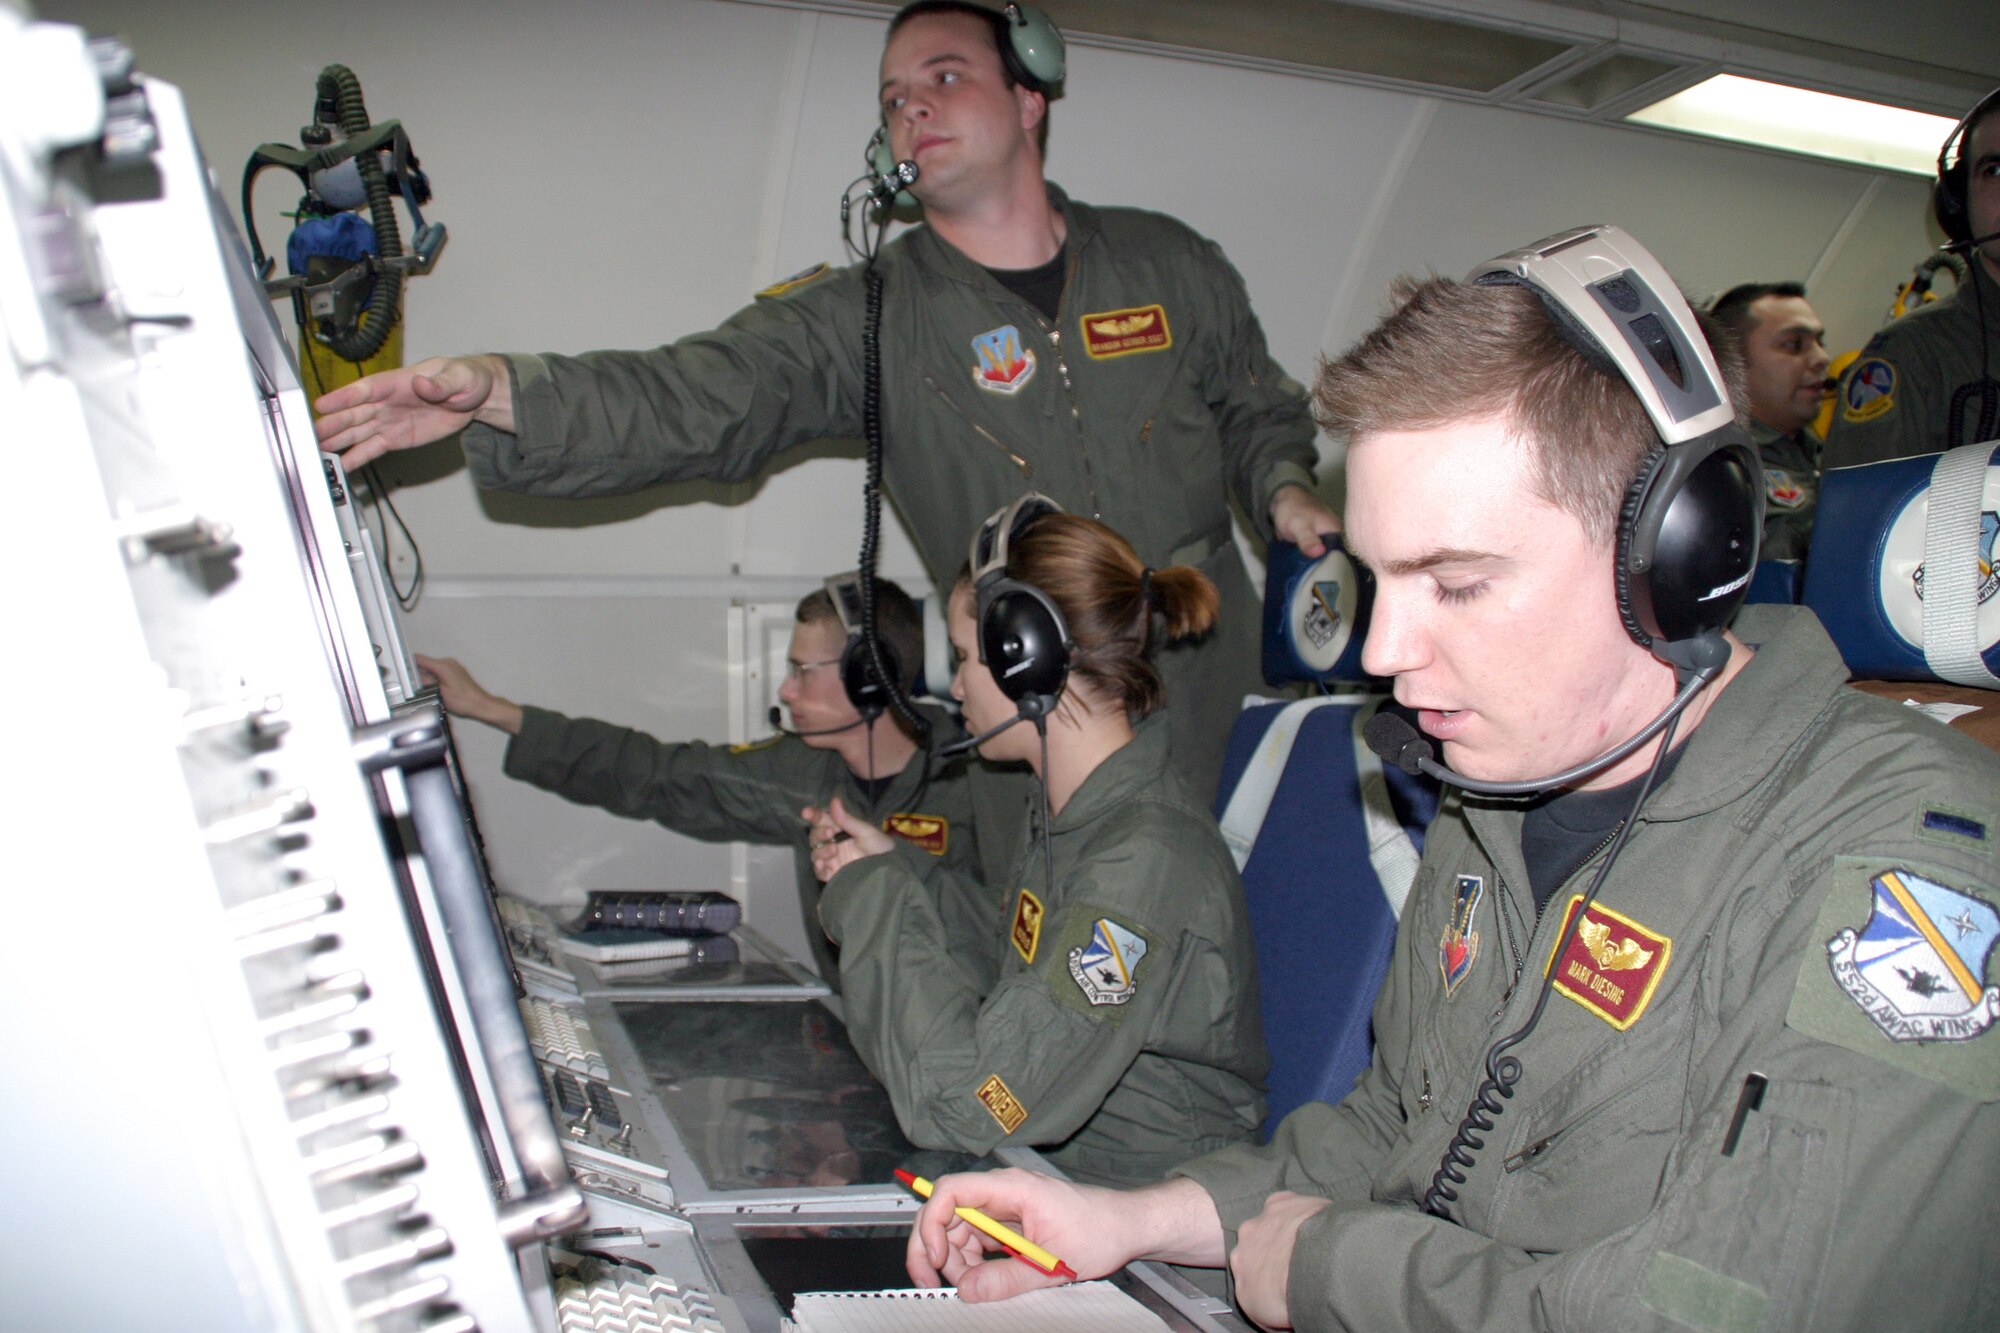 TINKER AIR FORCE BASE, Okla. (AFPN) -- Today, members of the 964th Airborne Air Control Squadron prepare for a Christmas Eve Santa tracking mission. Airborne warning and control systems crews will provide additional surveillance as part of Operation Track Santa. (U.S. Air Force photo)